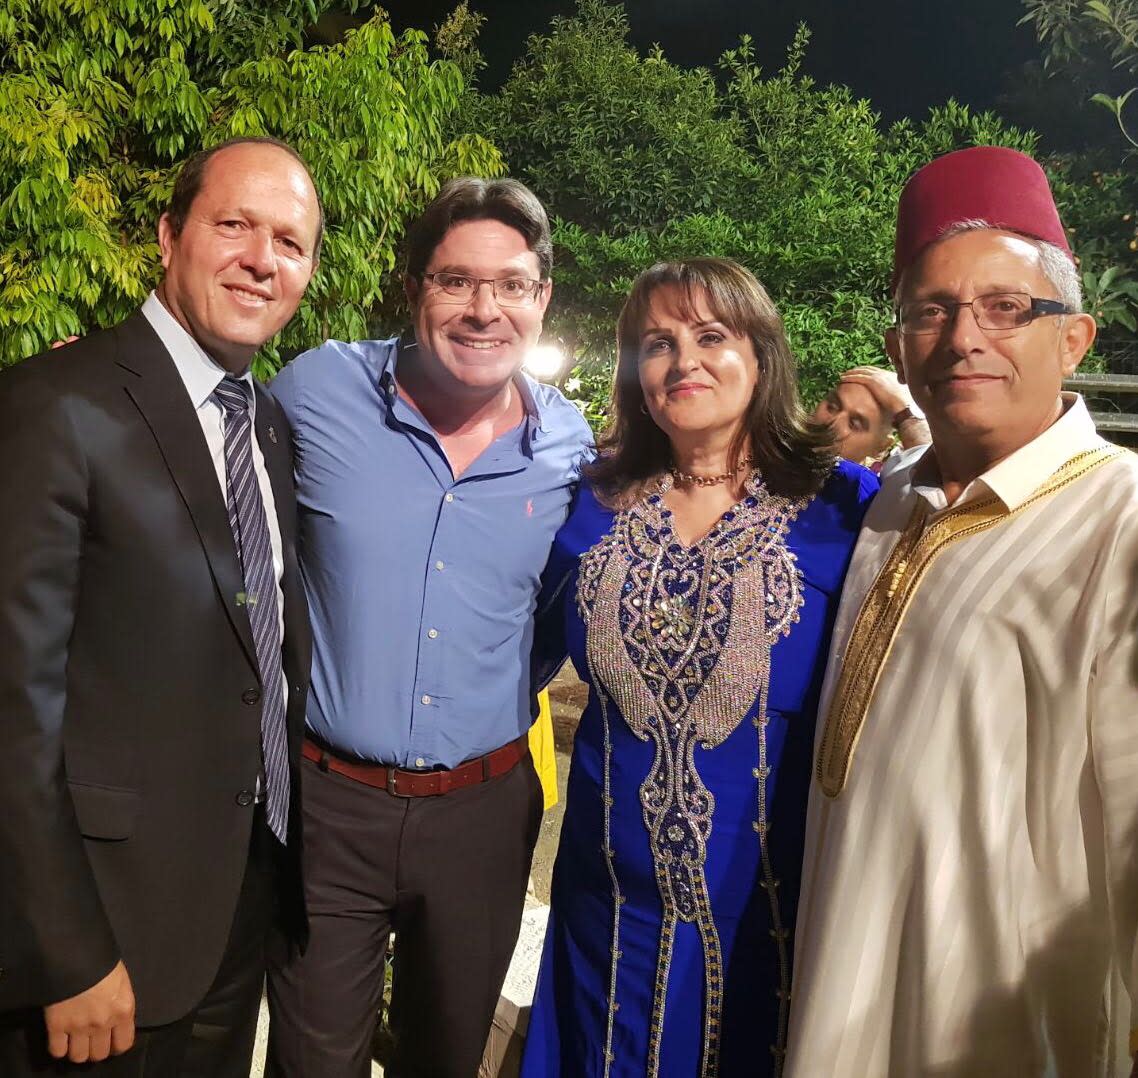 Science and Technology Minister Ofir Akunis and Jerusalem Mayor Nir Barkat at a Mimouna in Beit Shemesh, April 2018 (Courtesy)